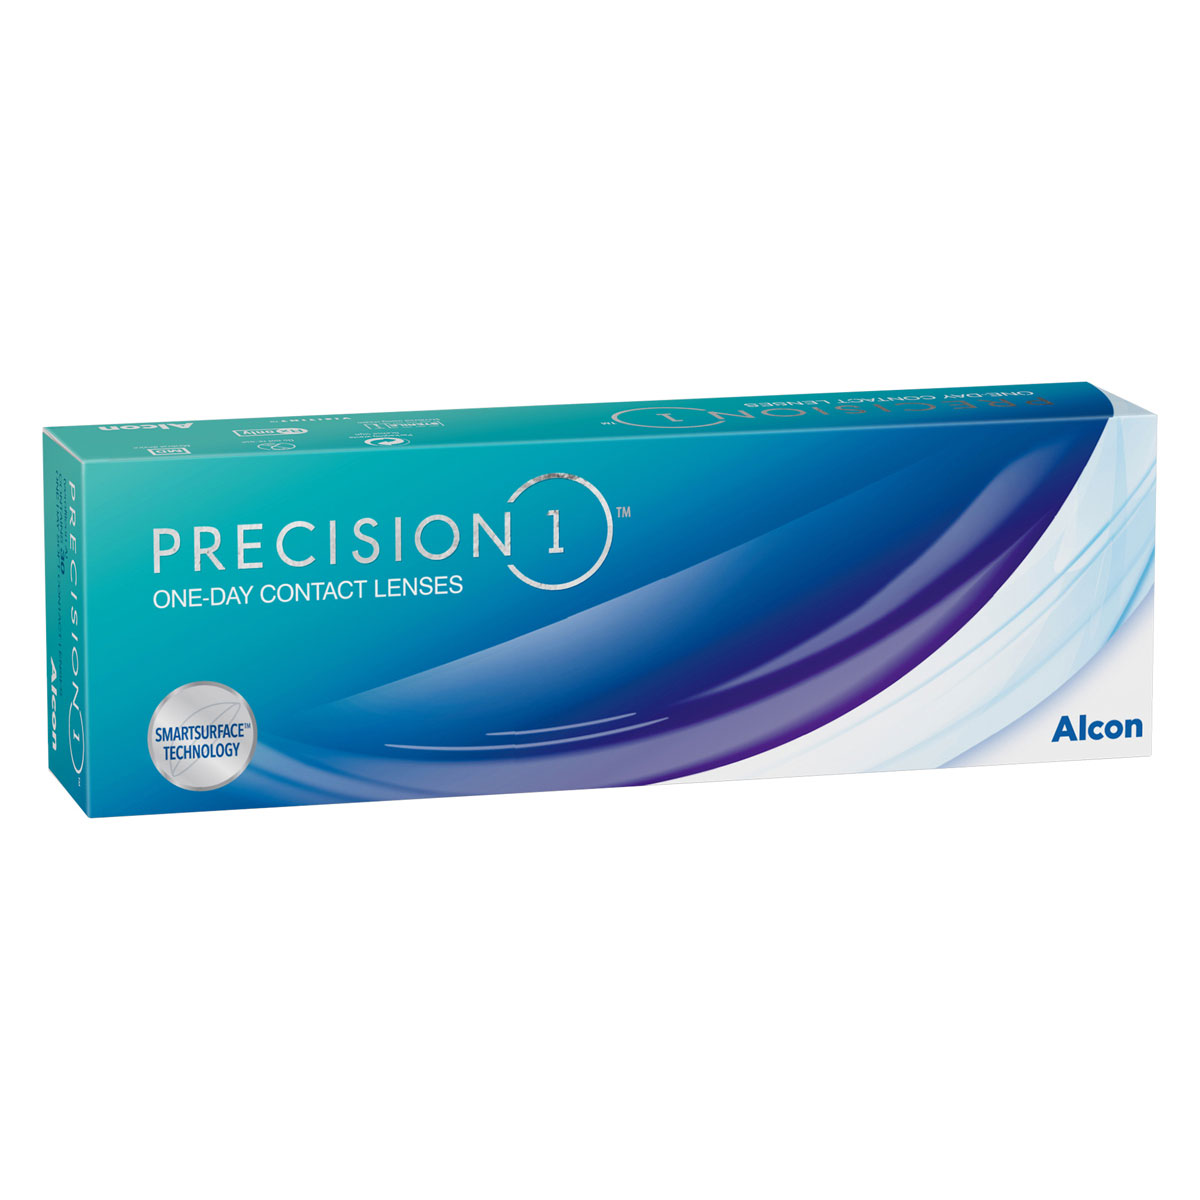 Precision 1 (30 Contact Lenses), Alcon, Daily Disposables, Silicone Hydrogel